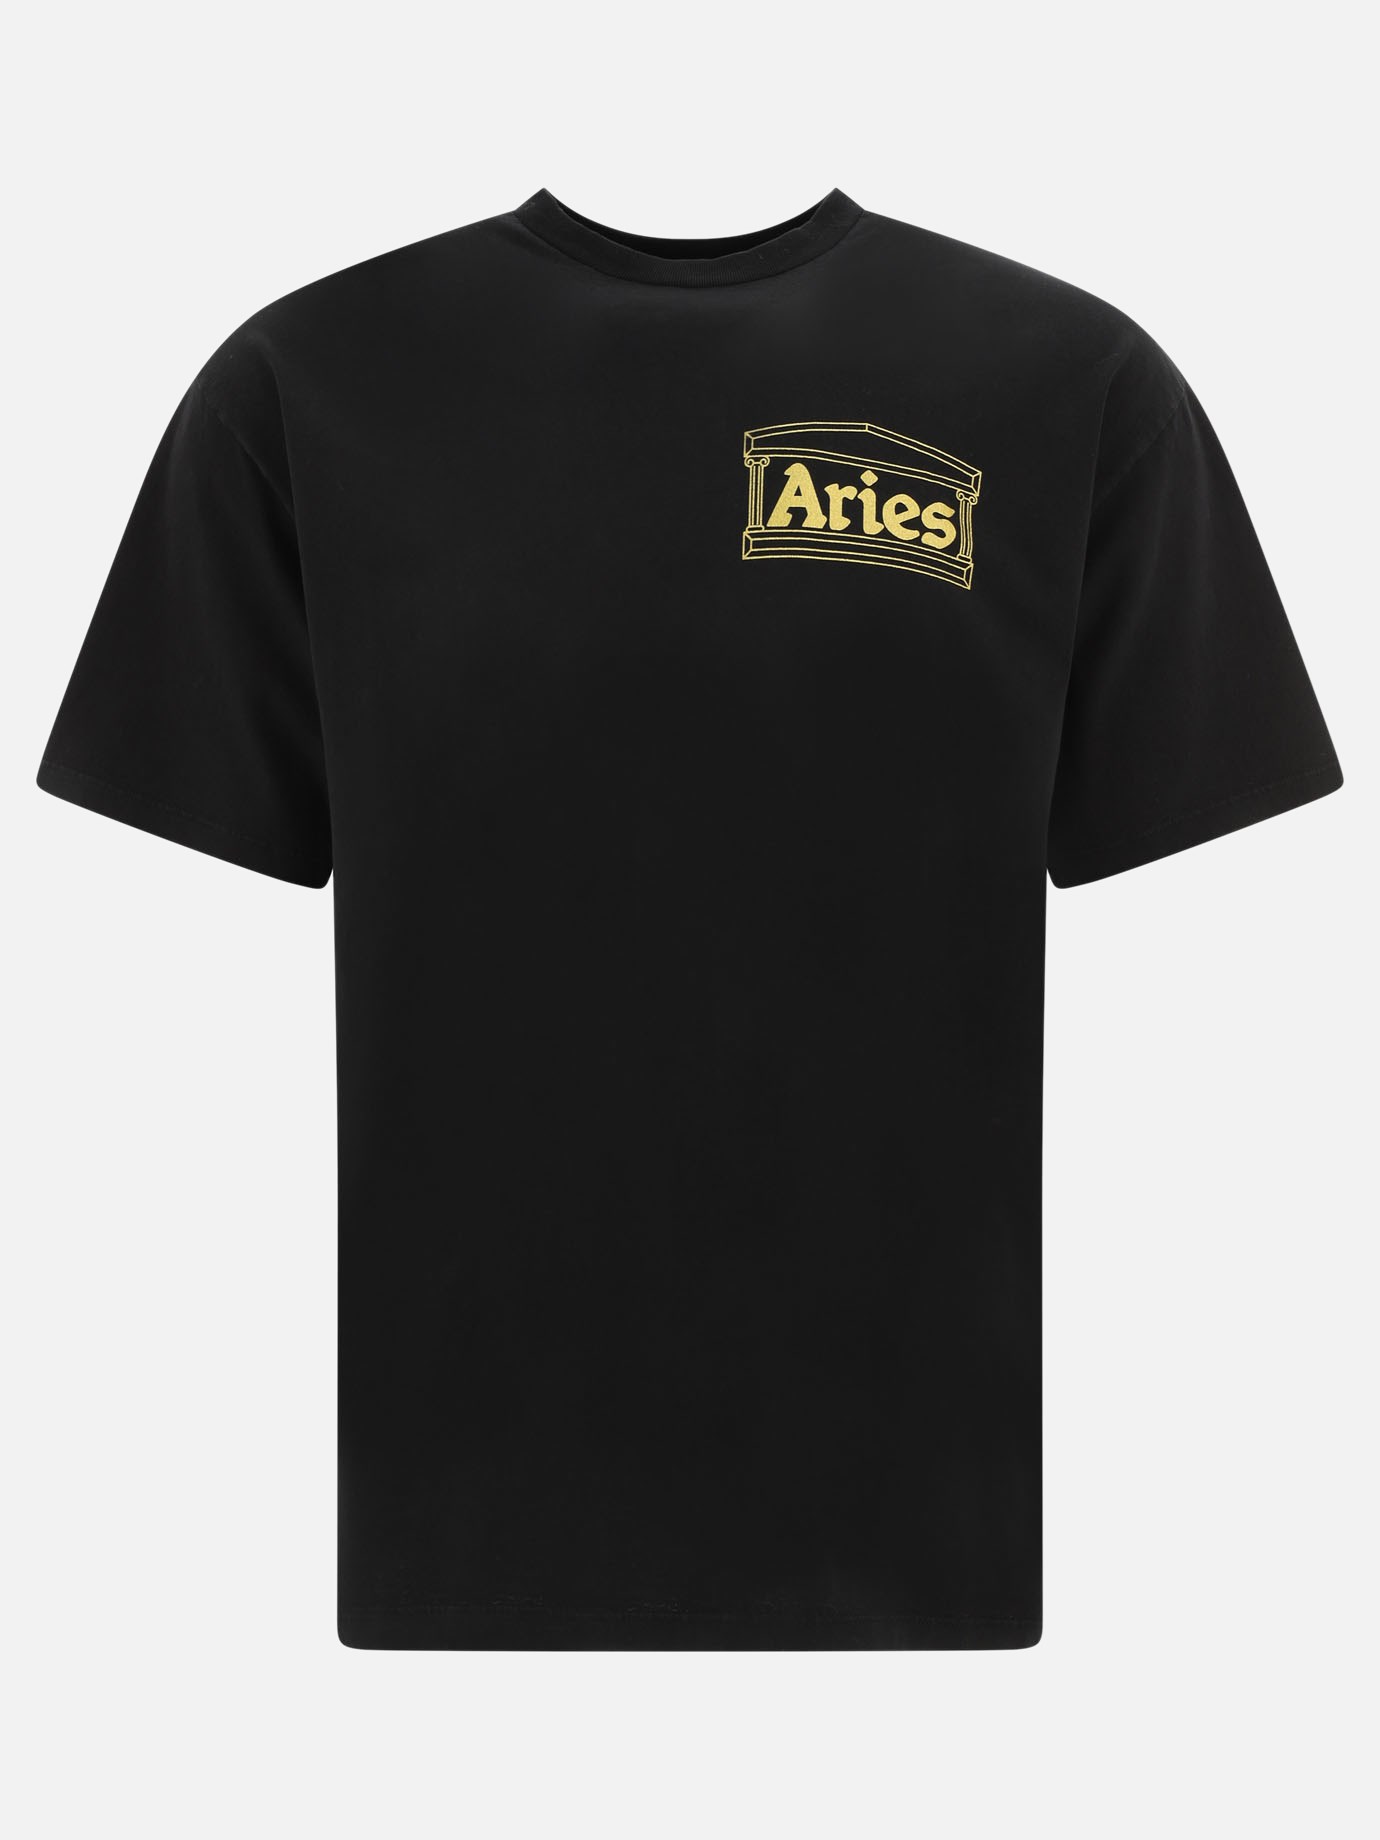  Temple  t-shirtby Aries - 2